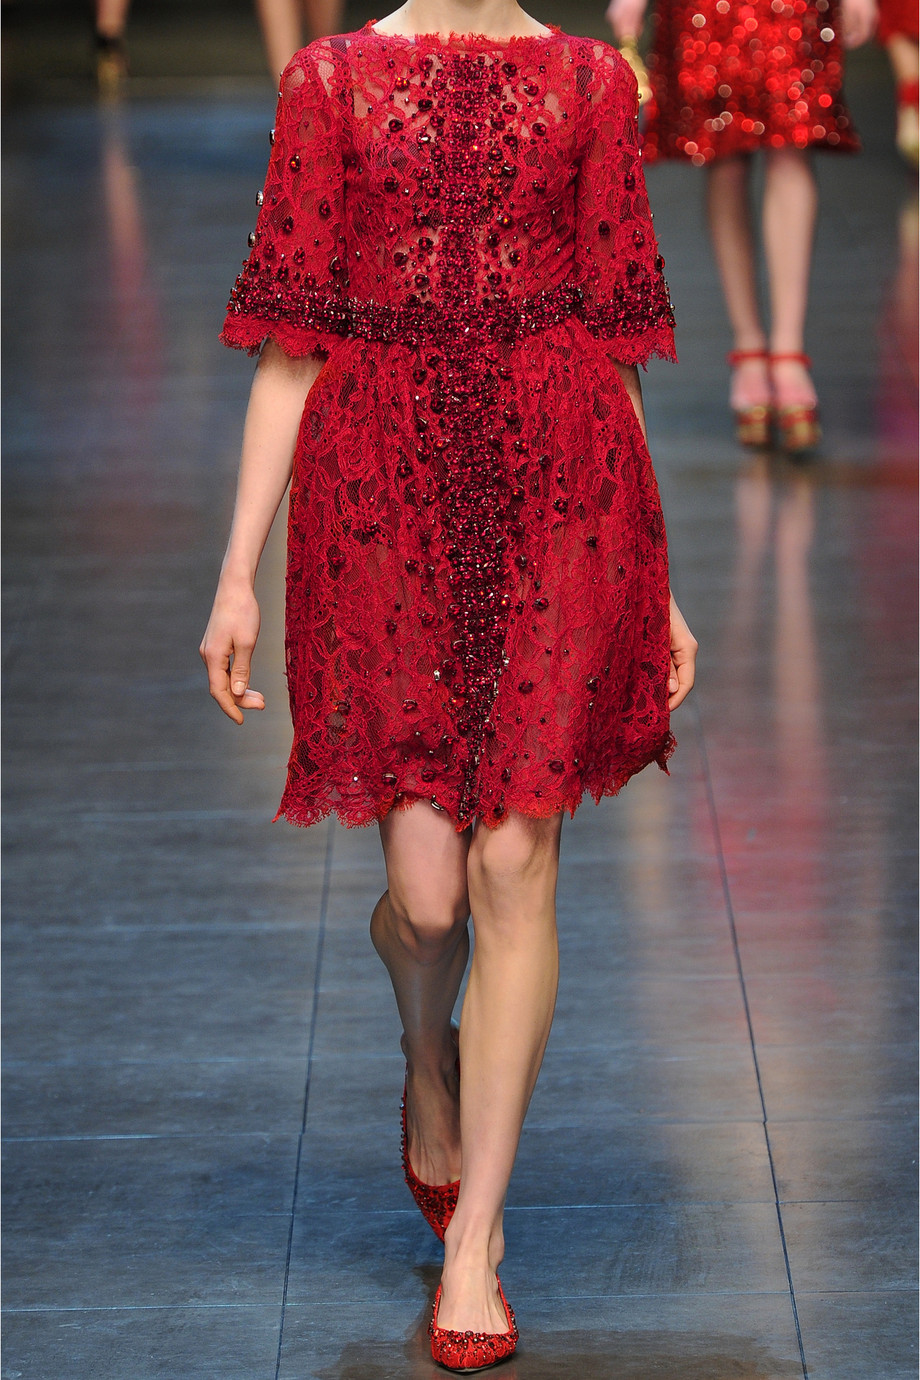 Lyst - Dolce & Gabbana Crystal Embellished Lace Dress in Red